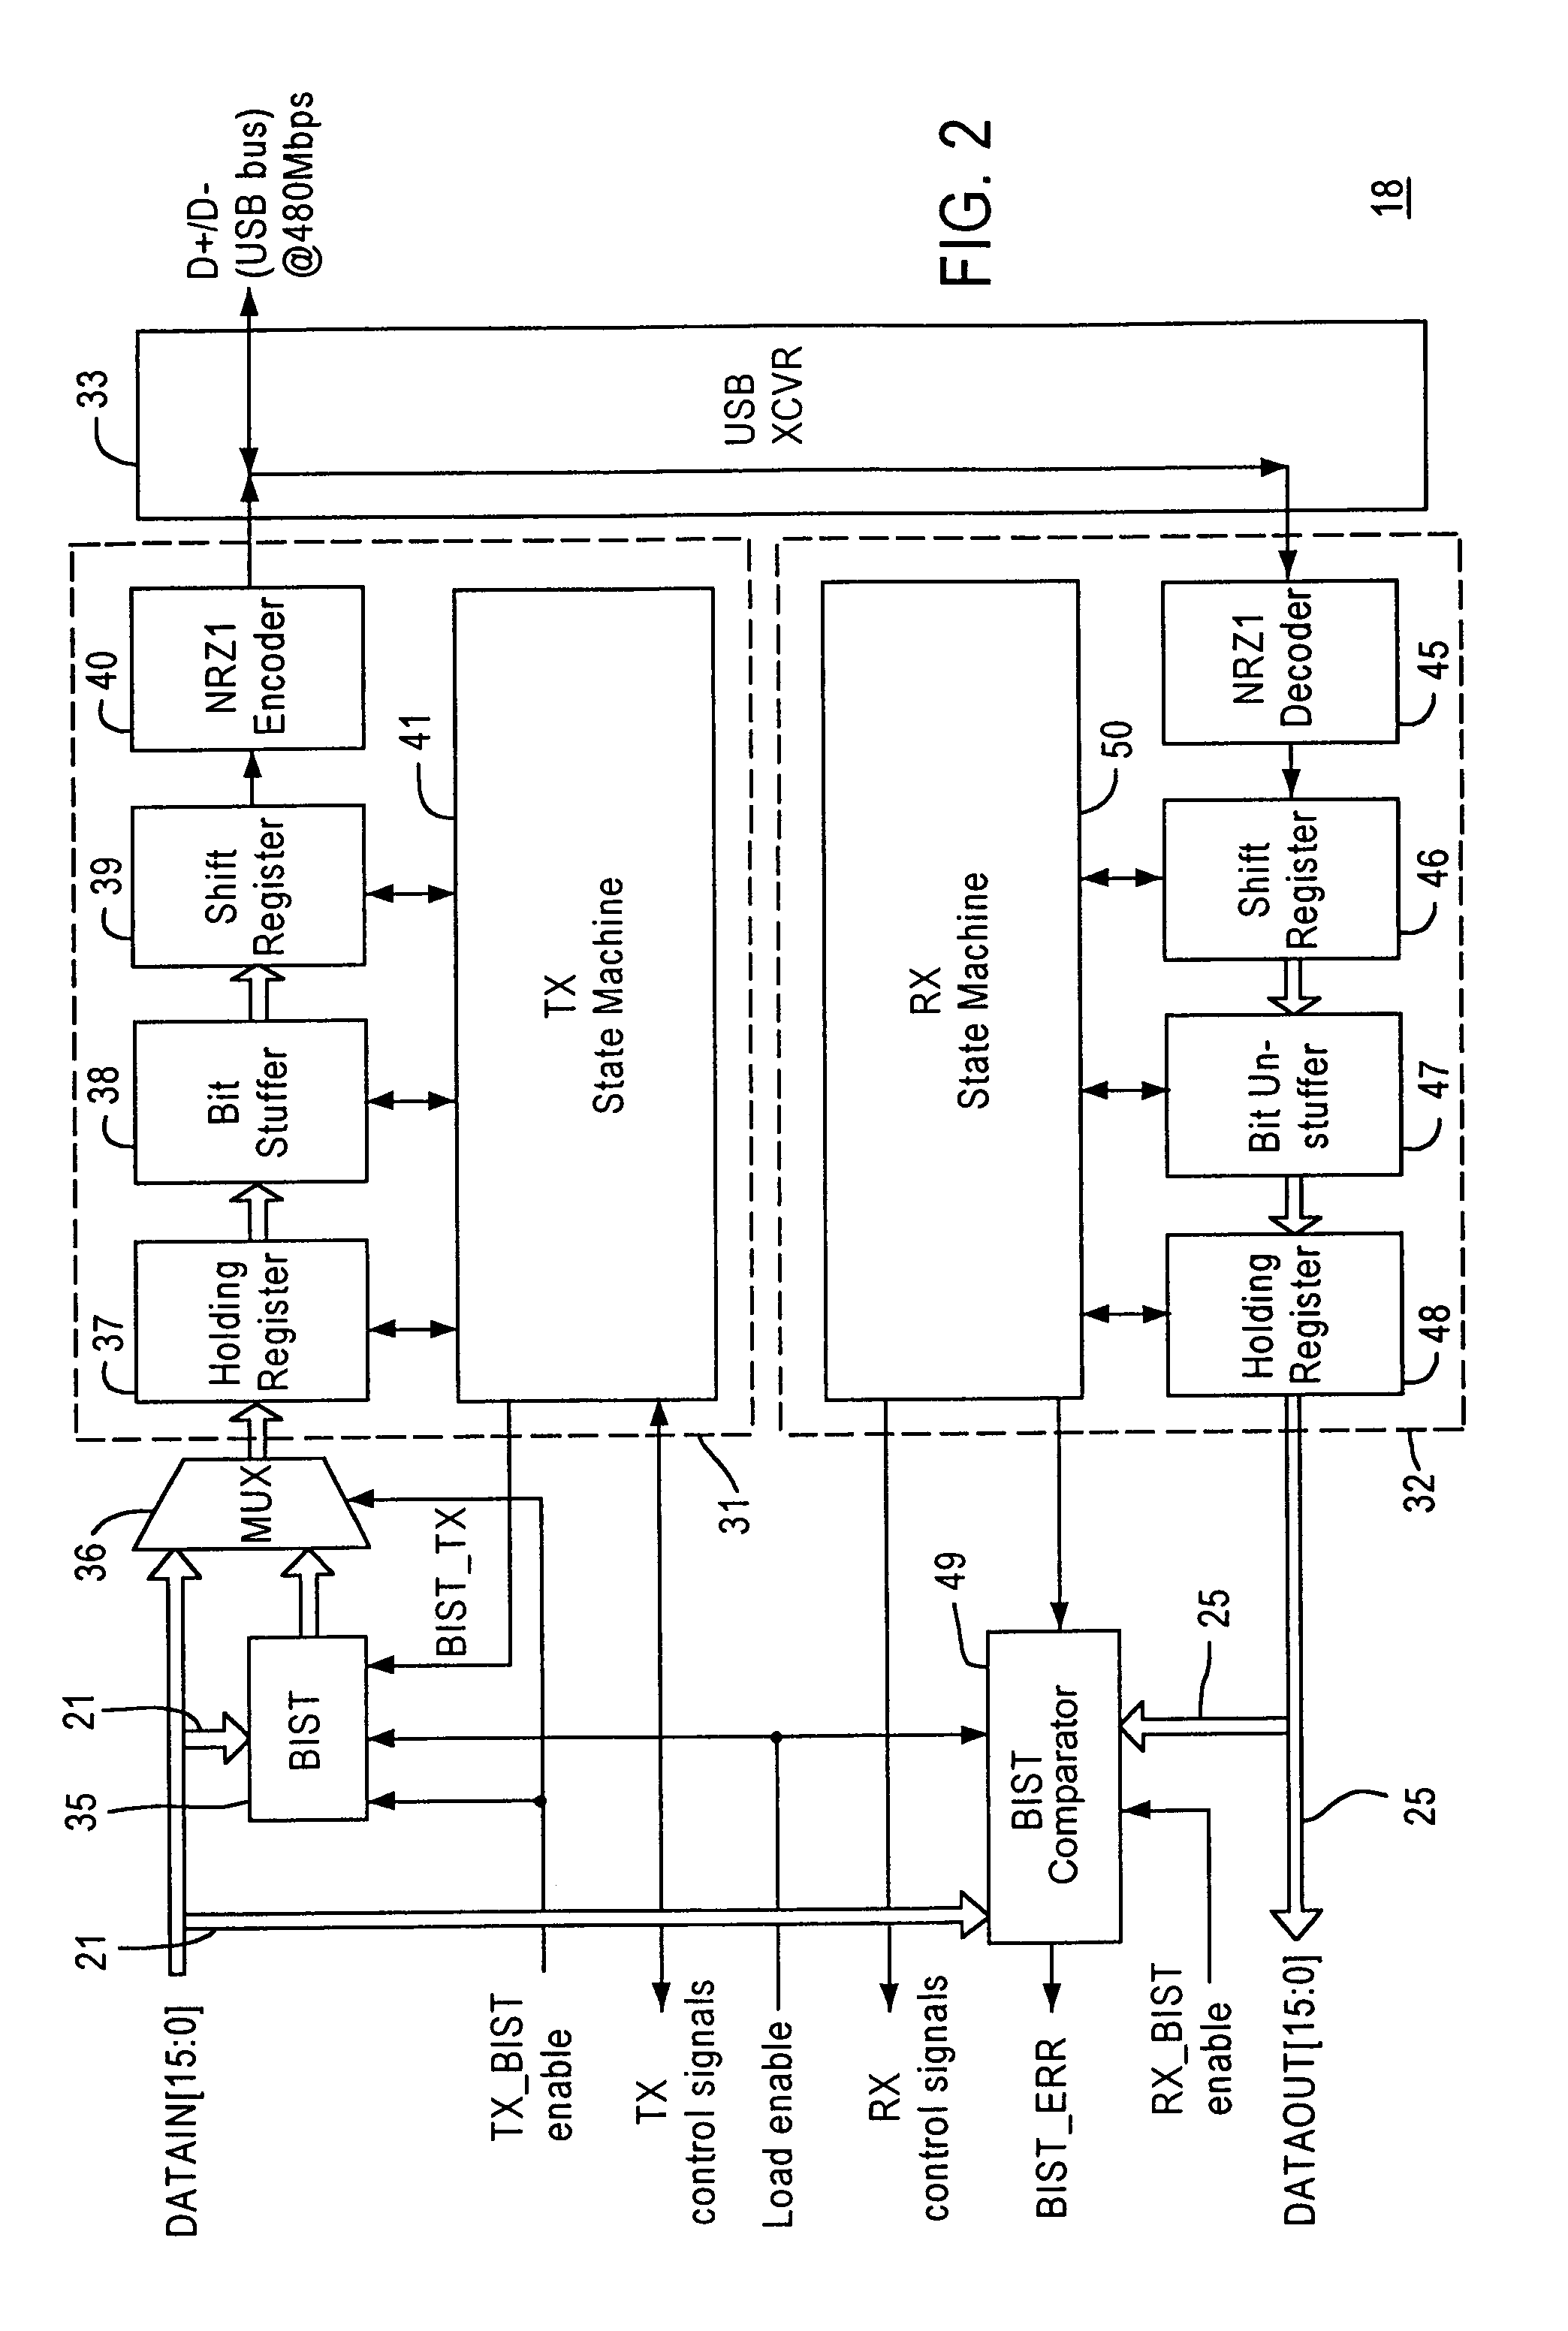 Self test circuit for evaluating a high-speed serial interface